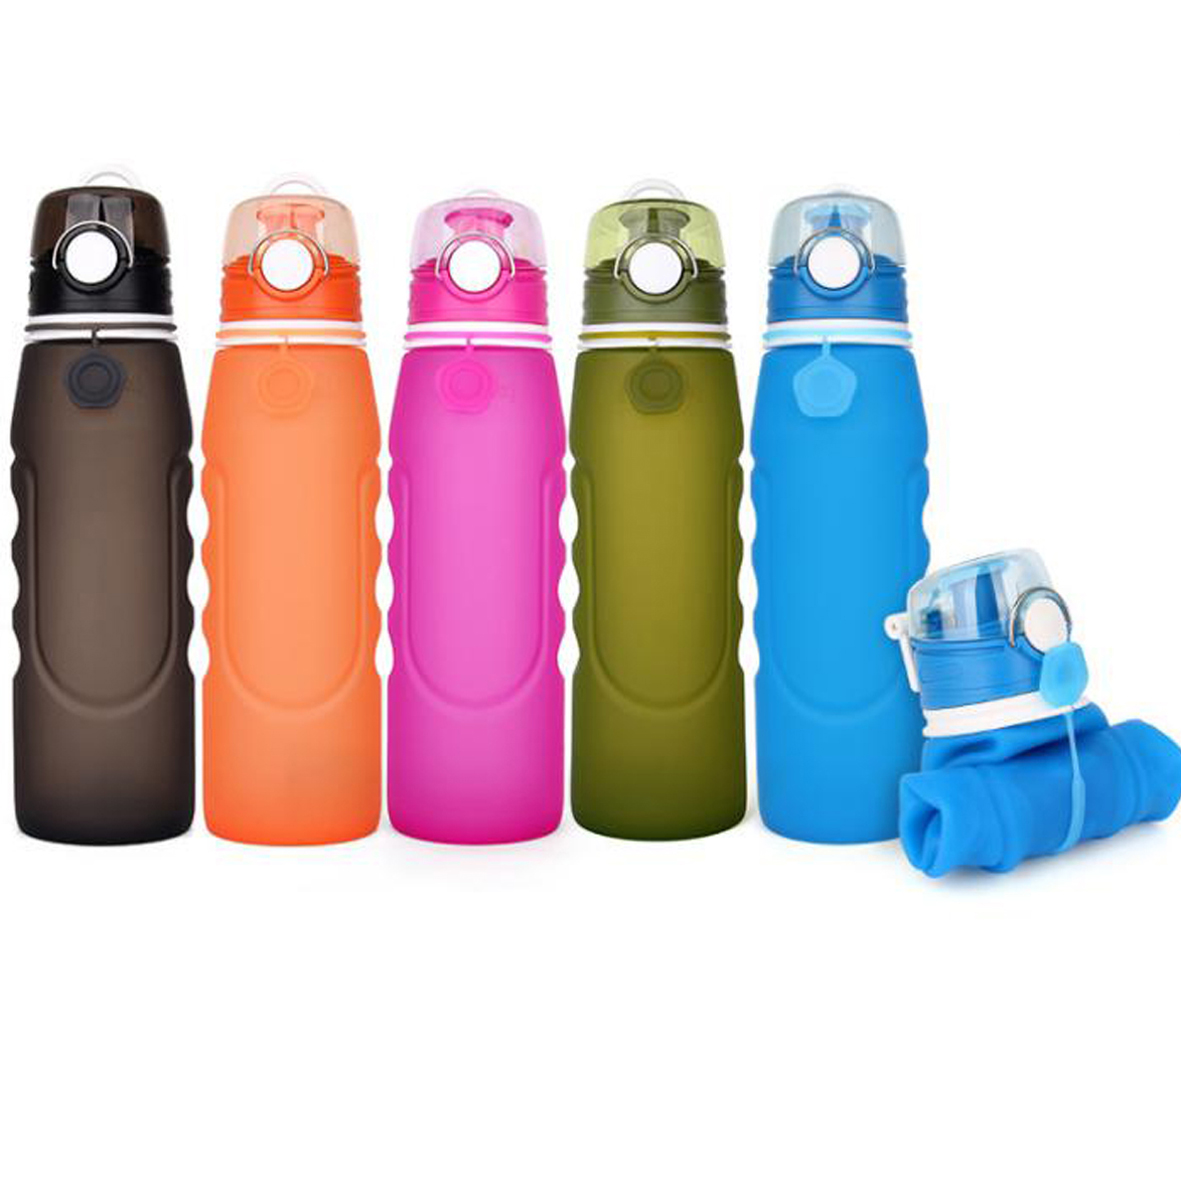 GL-ELY1181 1000ml Foldable Silicone Water Bottle